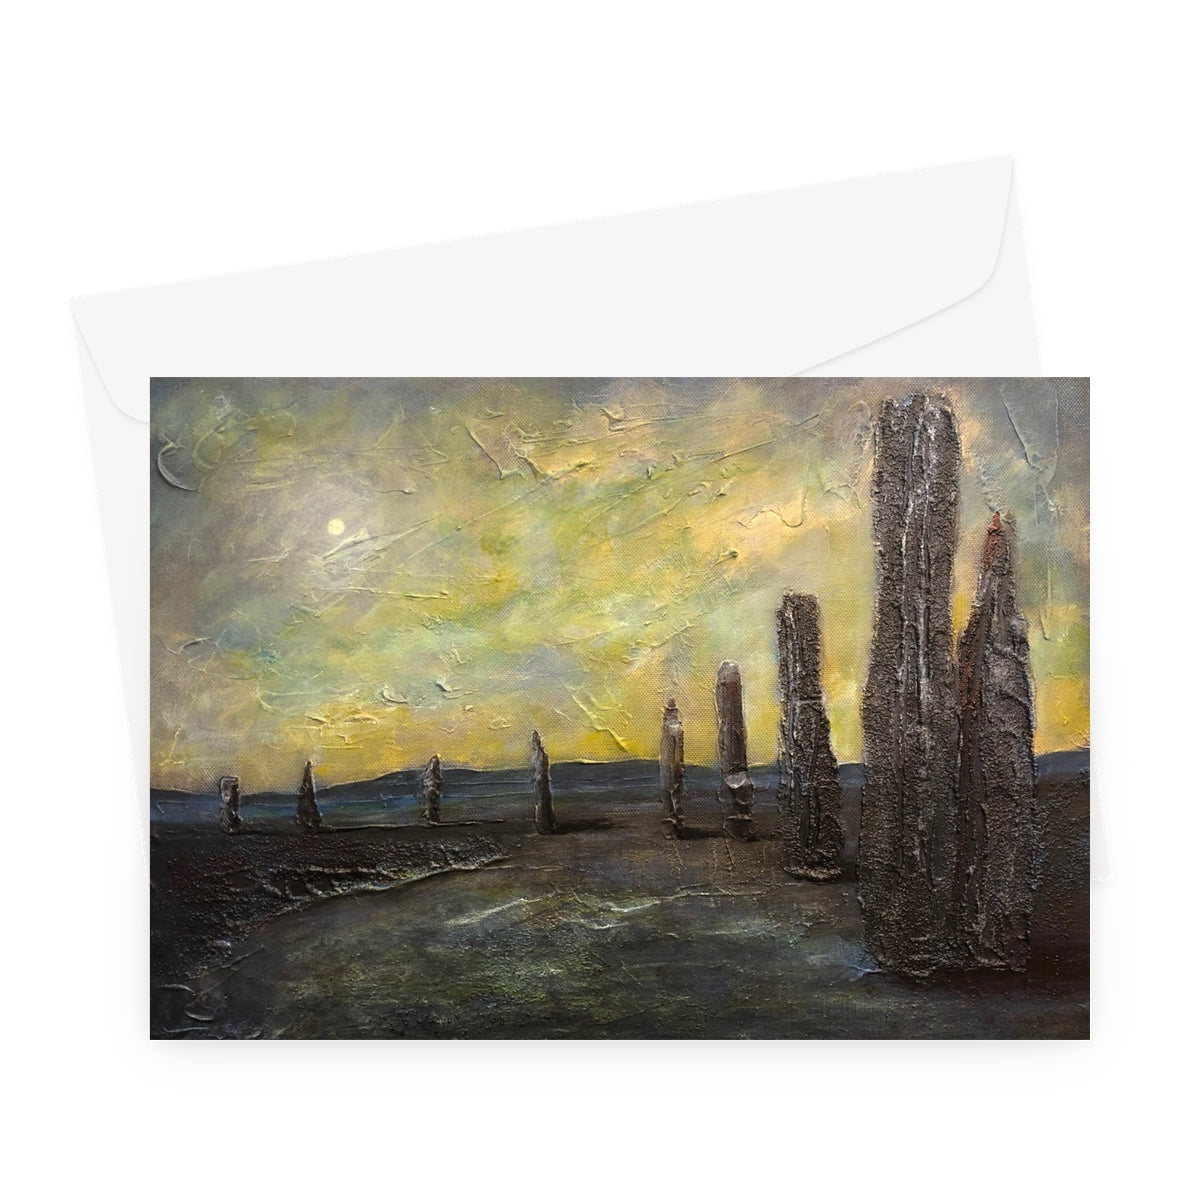 An Ethereal Ring Of Brodgar Art Gifts Greeting Card-Greetings Cards-Orkney Art Gallery-A5 Landscape-1 Card-Paintings, Prints, Homeware, Art Gifts From Scotland By Scottish Artist Kevin Hunter